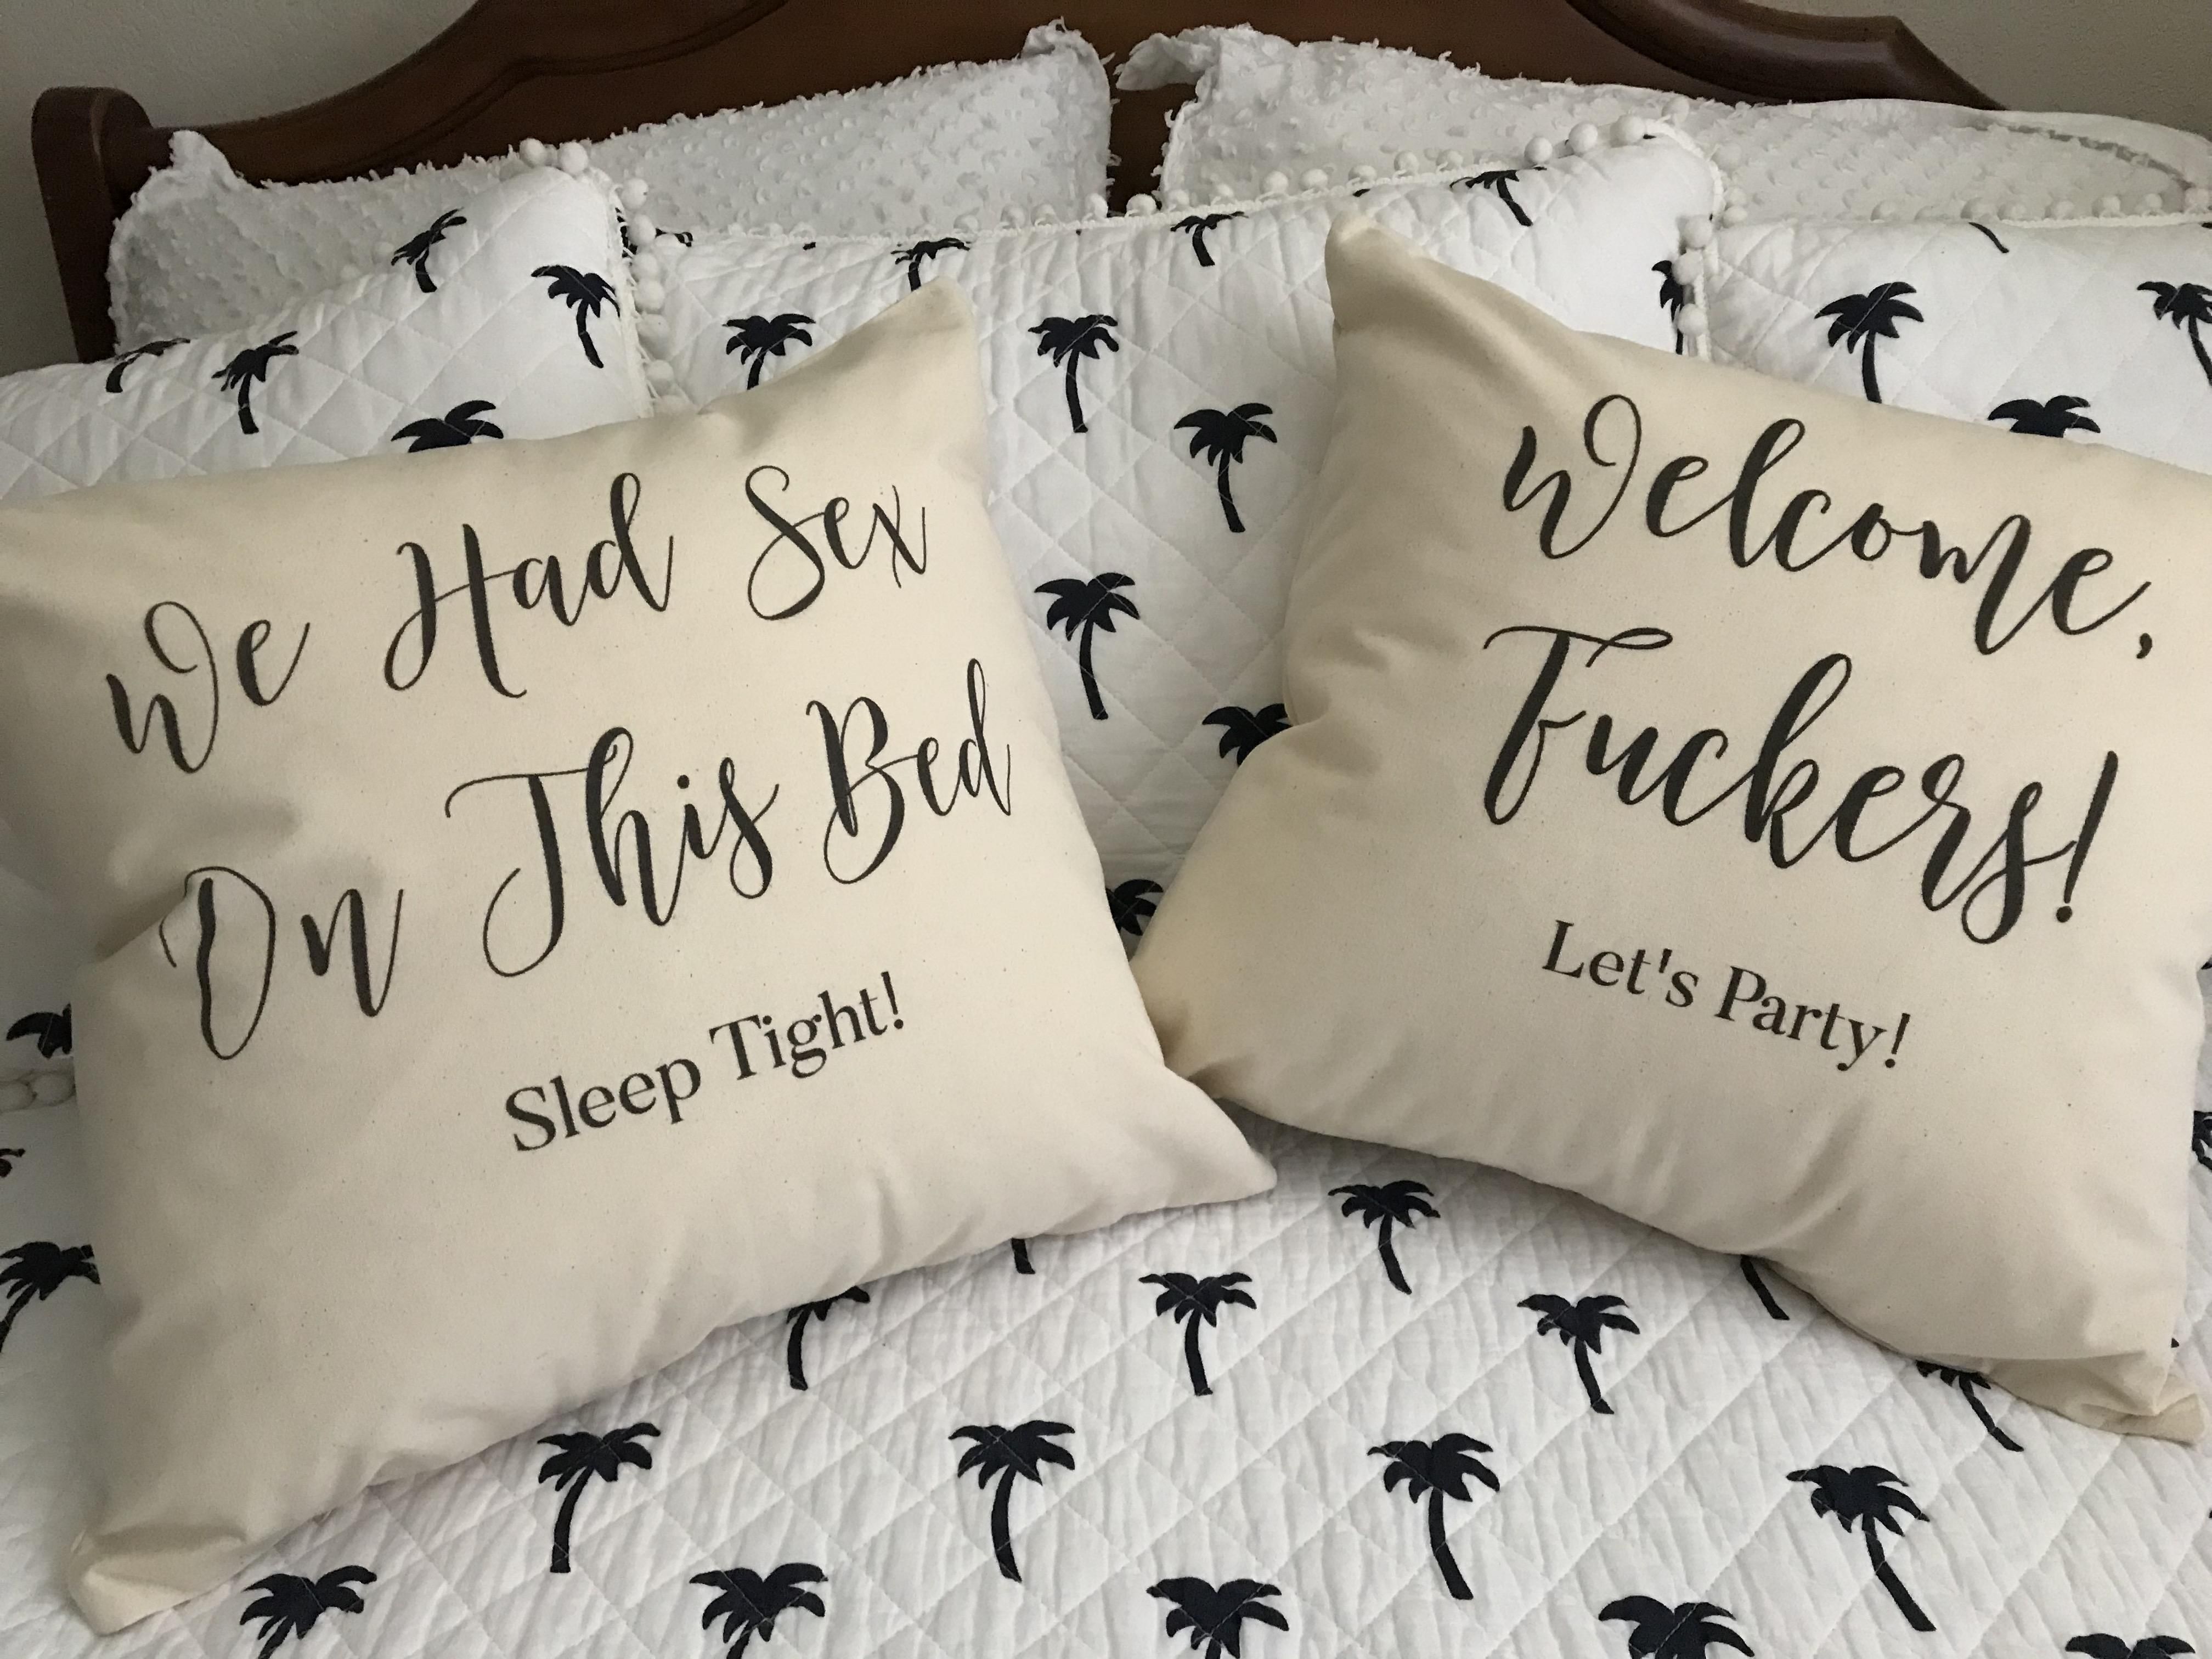 Just ordered some new throw pillows for the guest bedroom. Watch out!